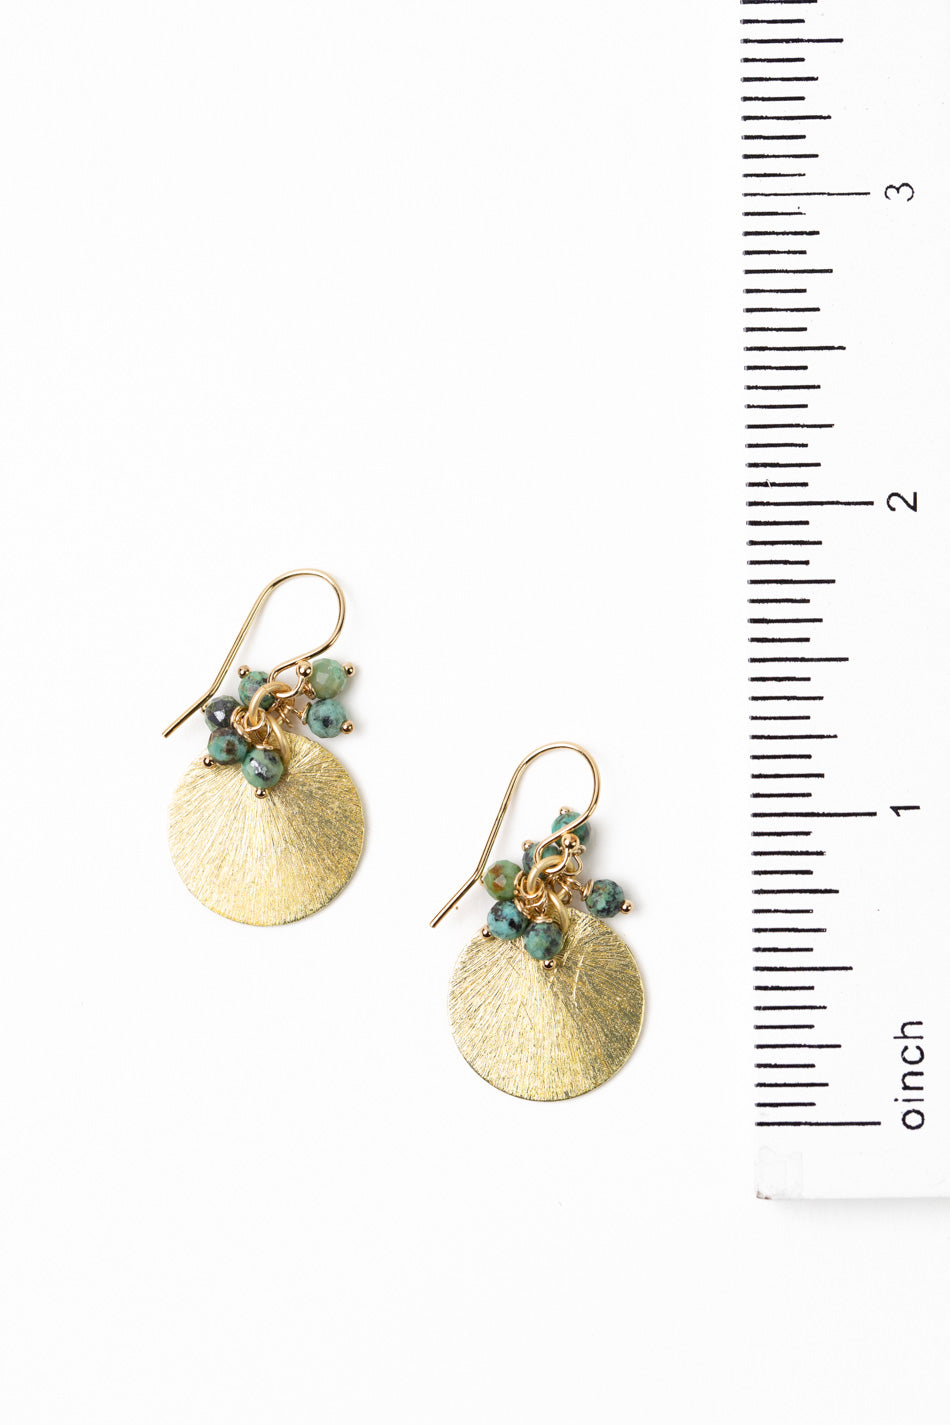 Tranquil Gardens African Turquoise, Brushed Gold Simple Earrings